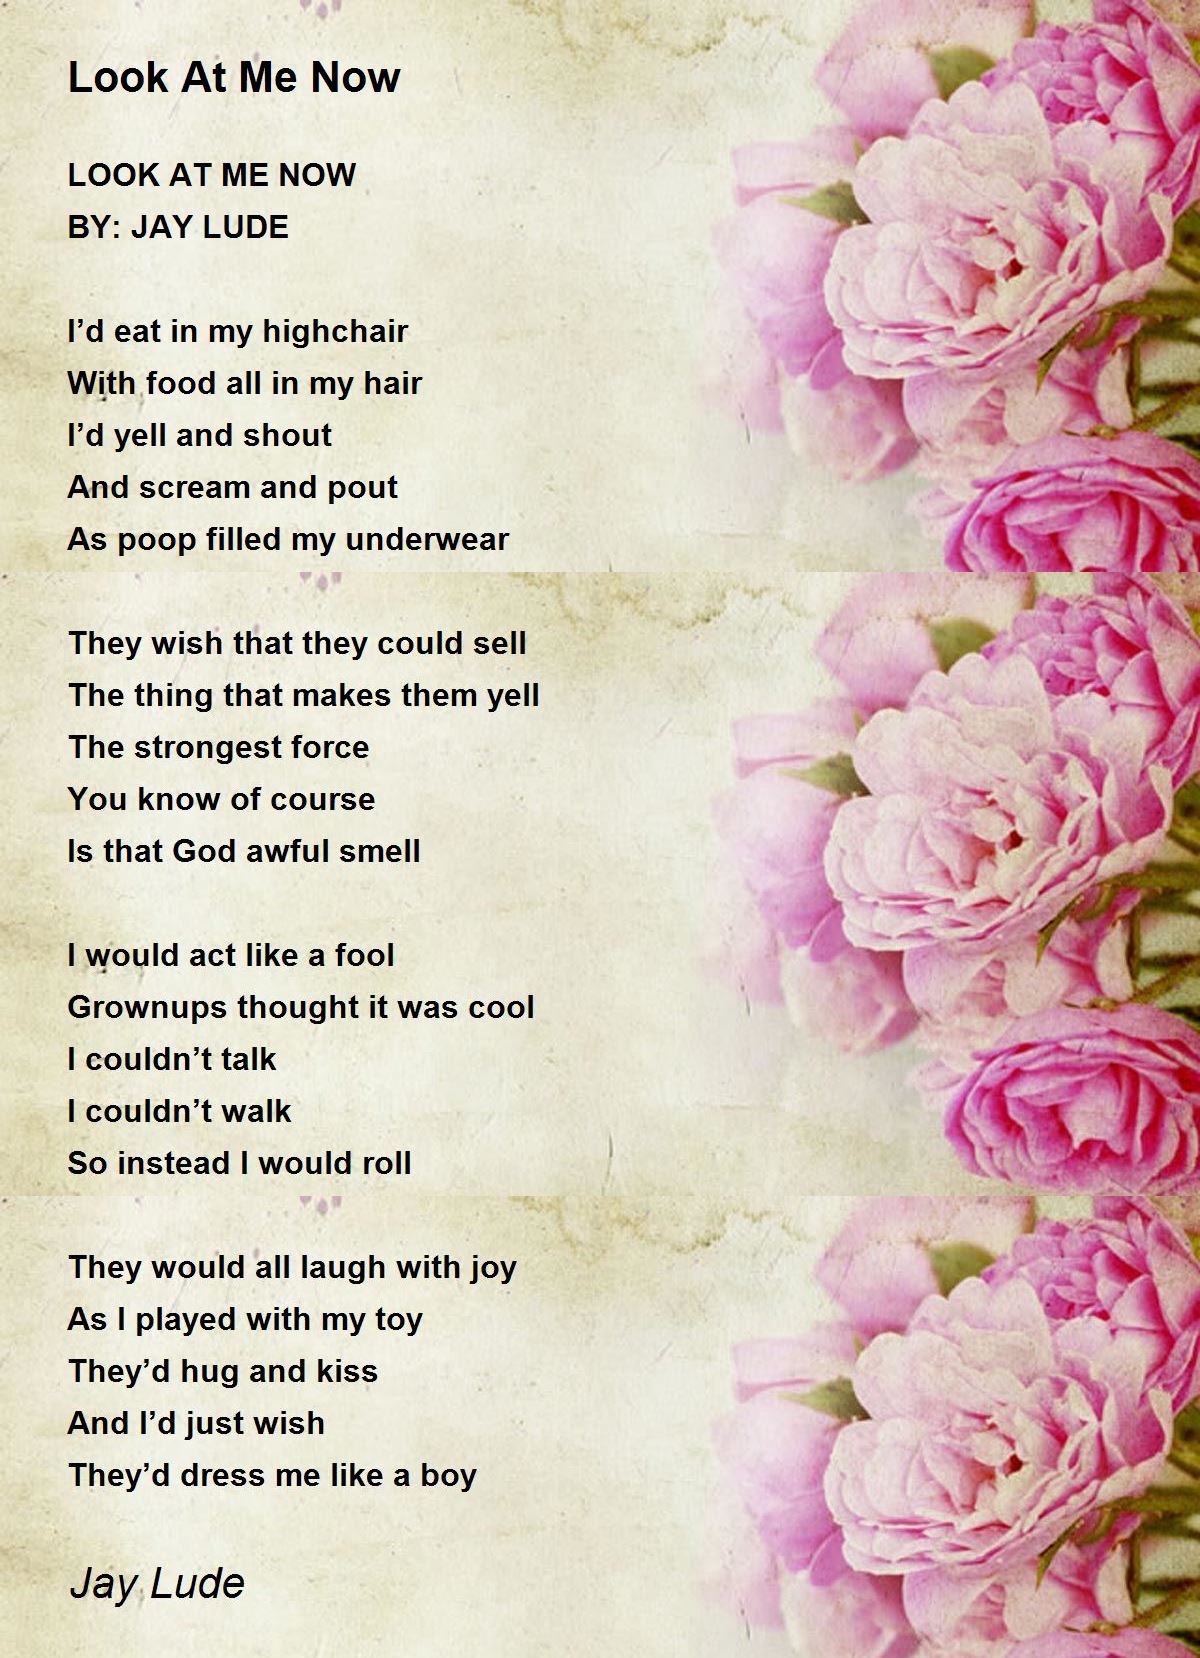 Look At Me Now - Look At Me Now Poem by Jay Lude